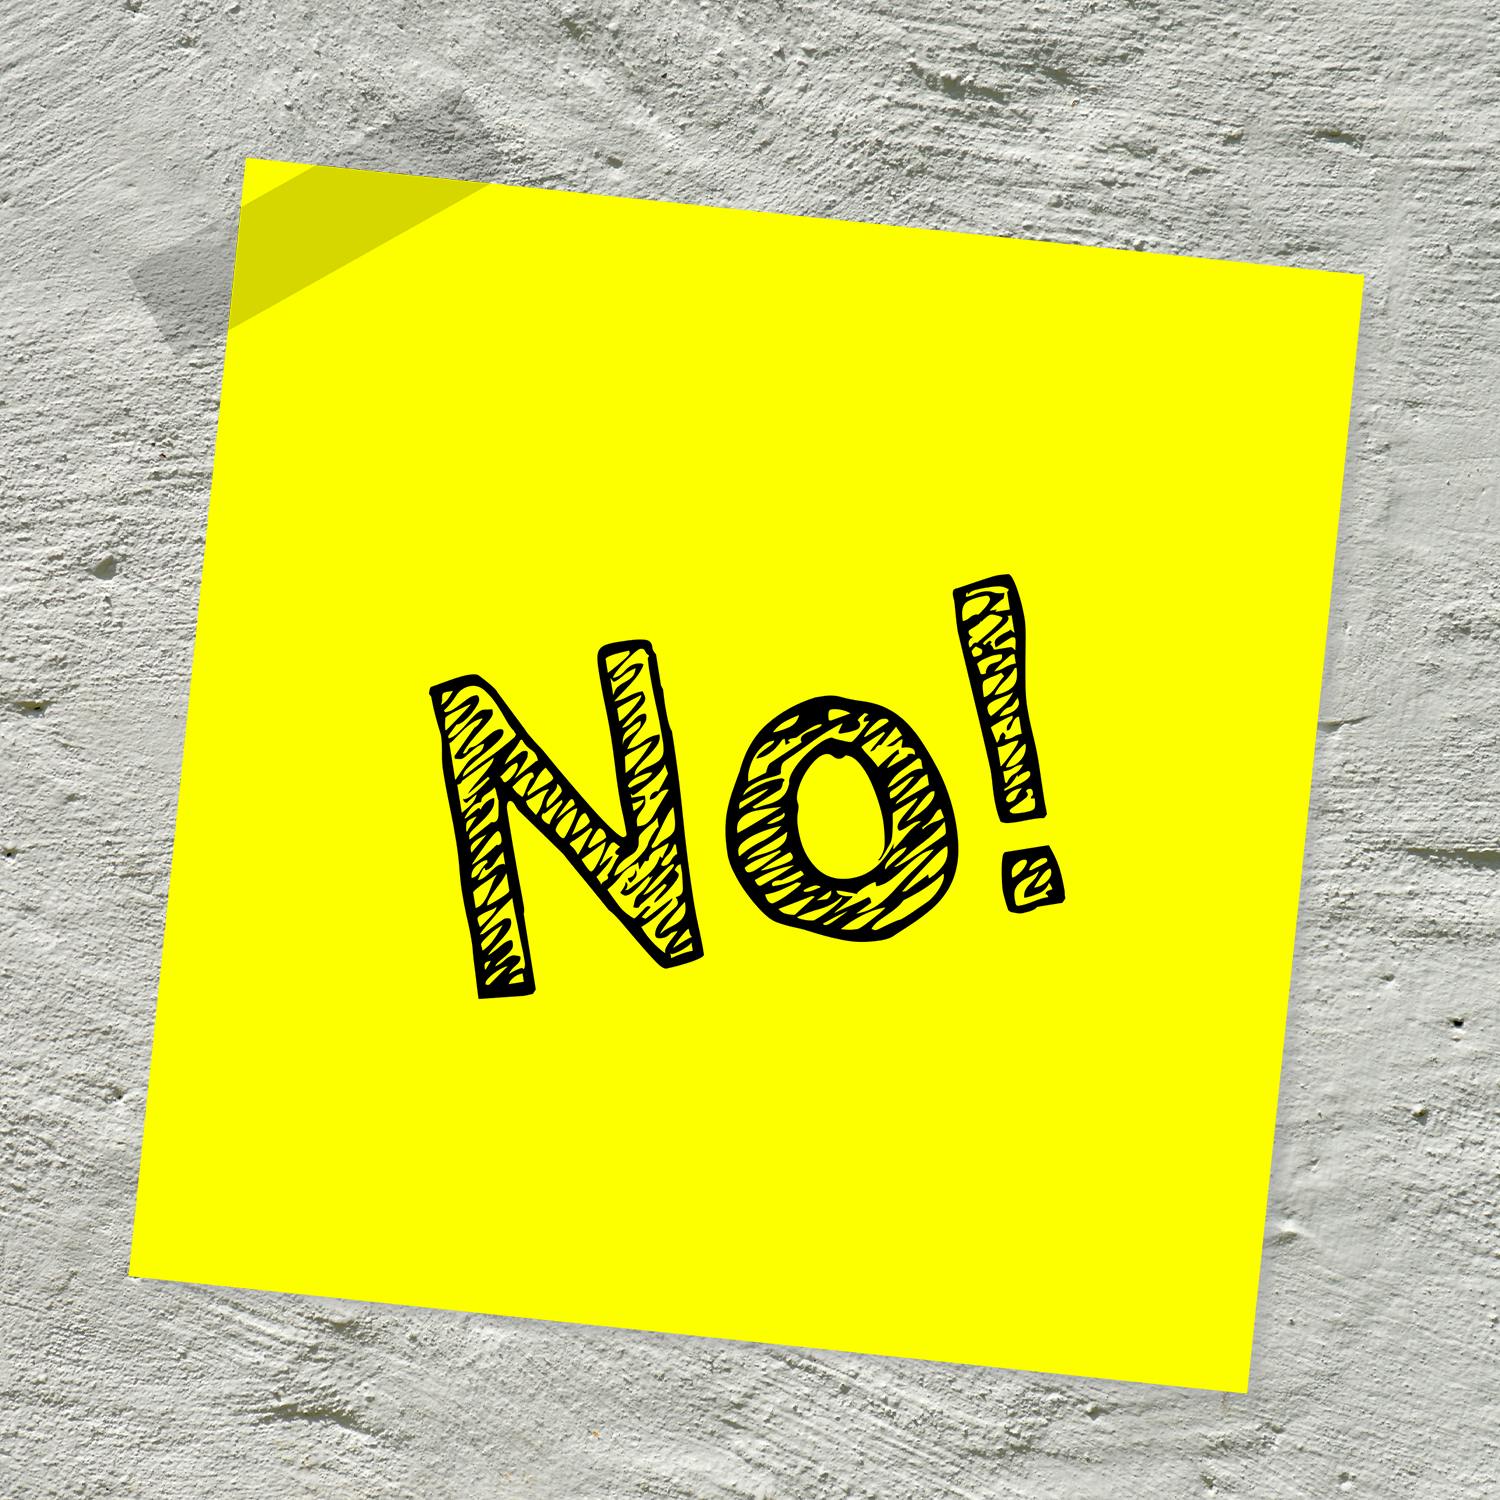 Are Irish people unable to say ‘no’?